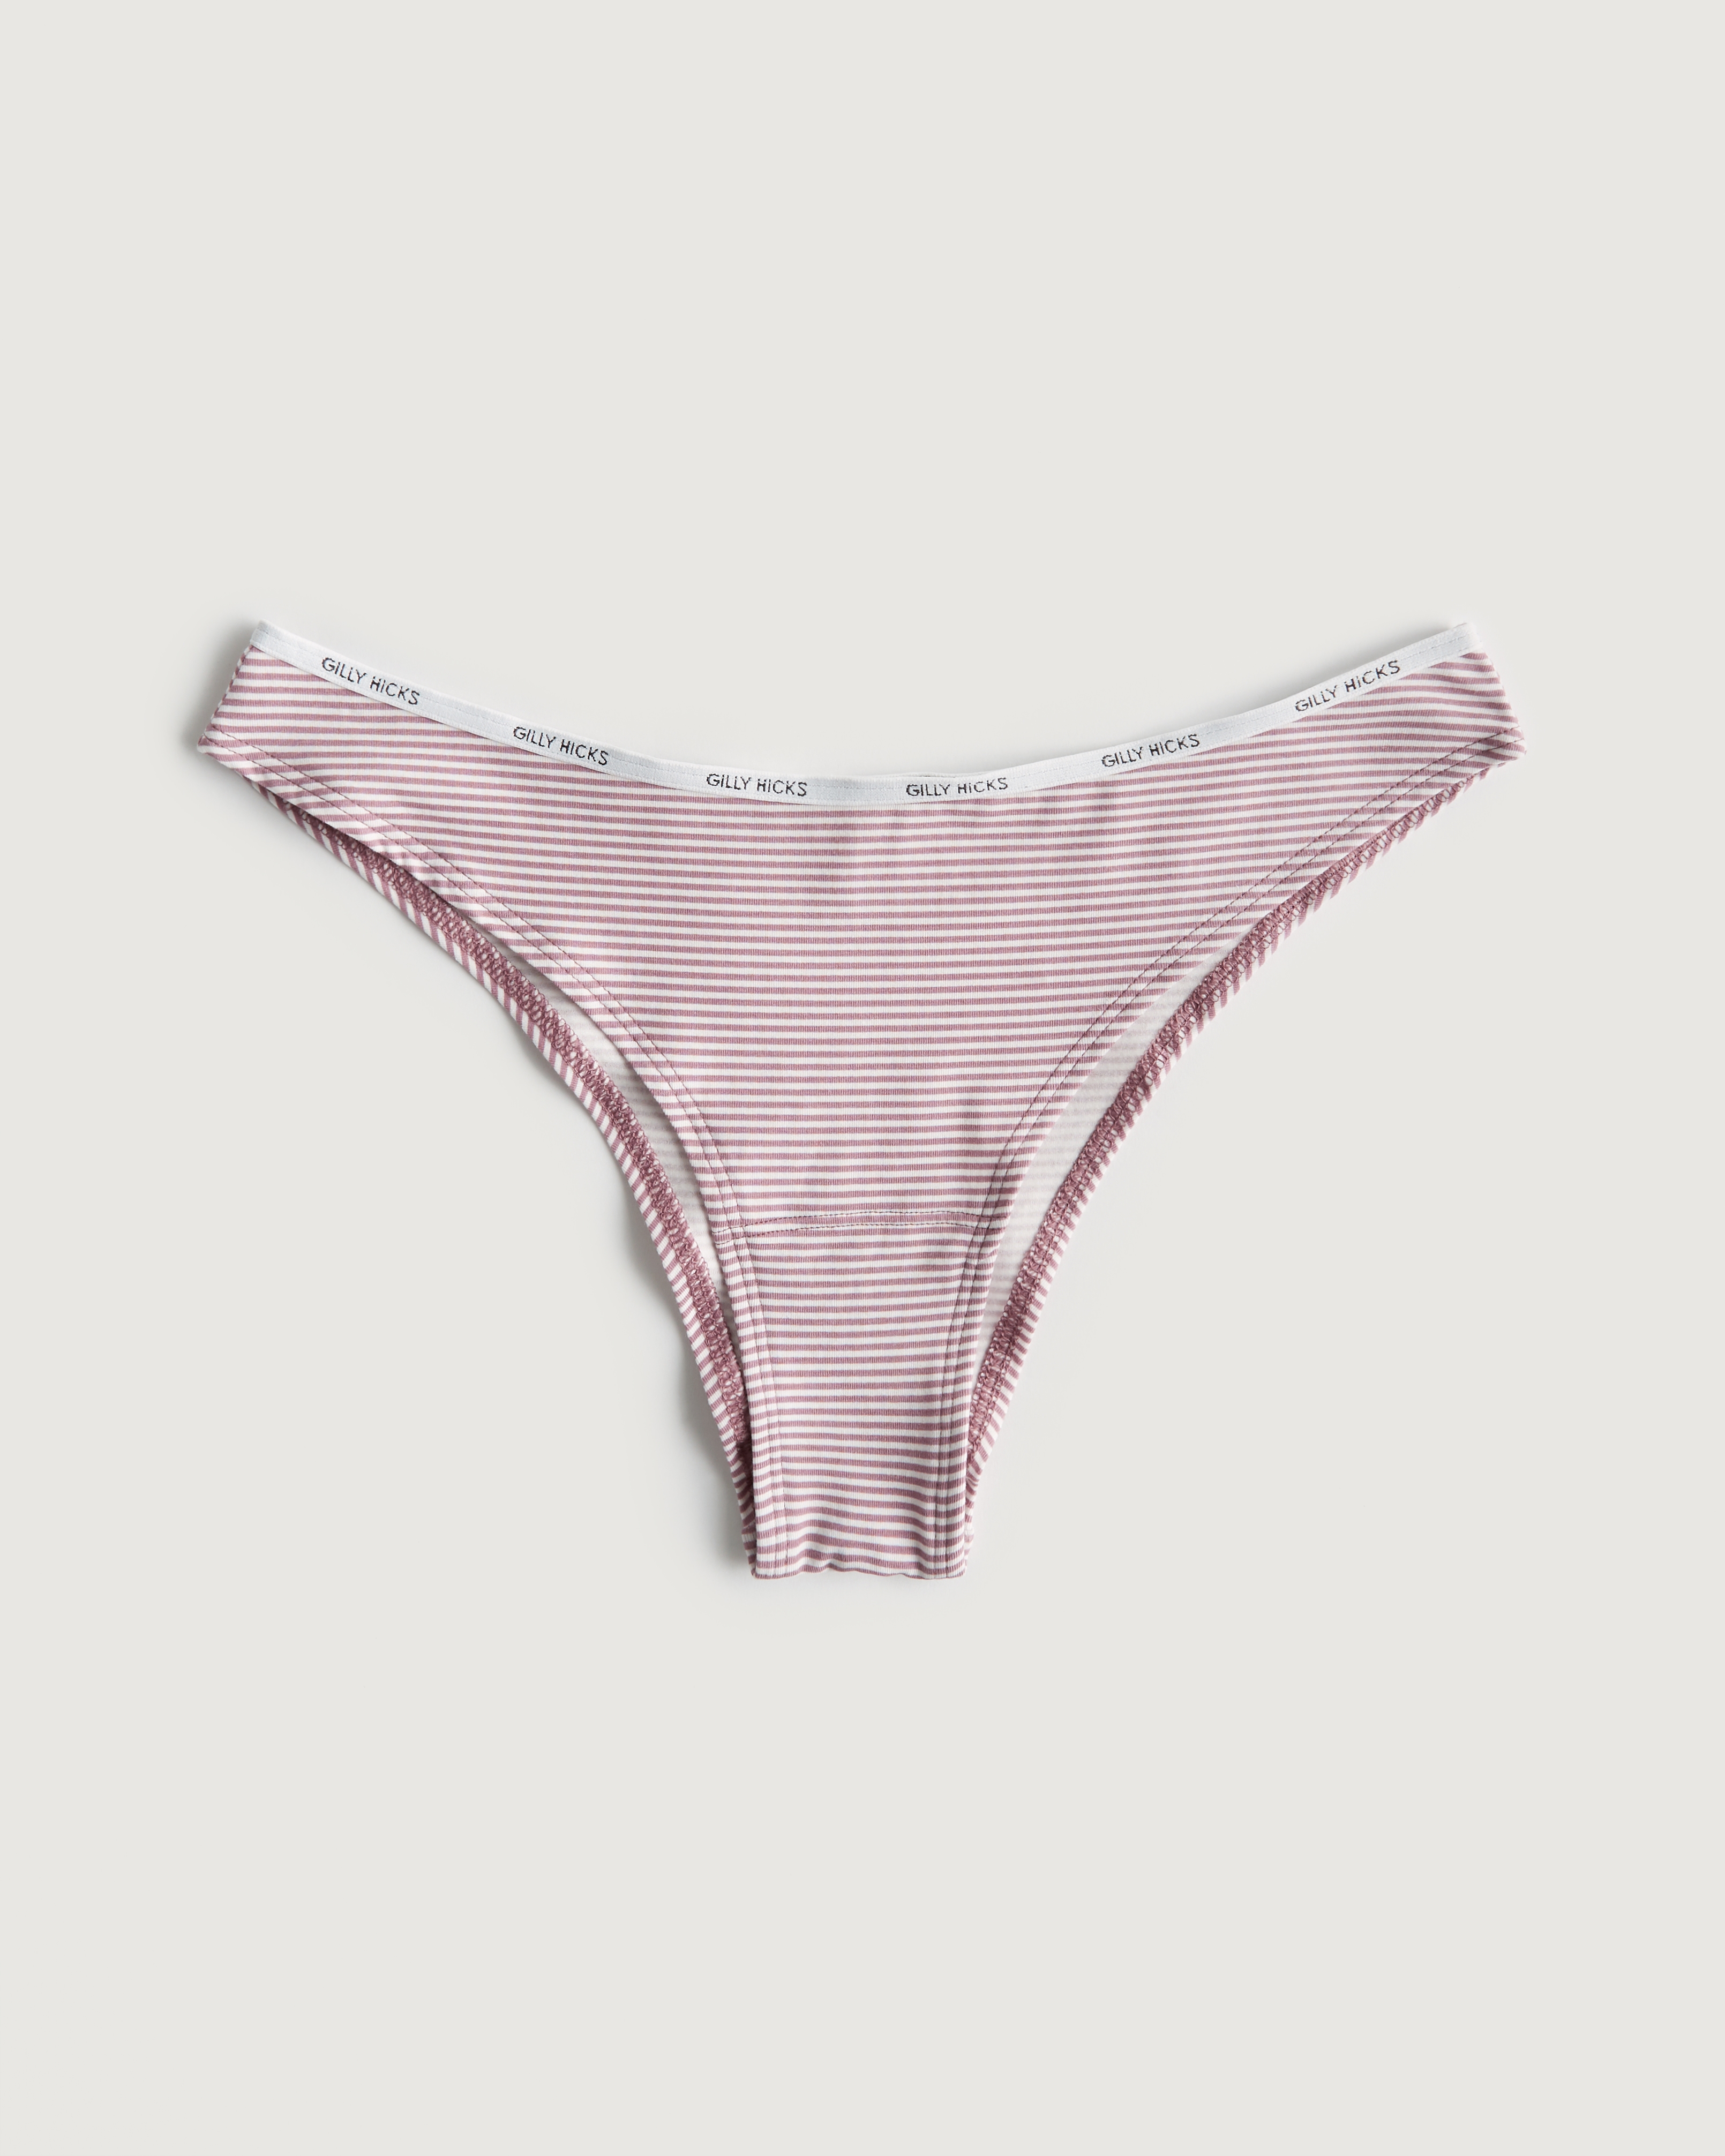 Hollister Gilly Hicks Ribbed Cotton Cheeky